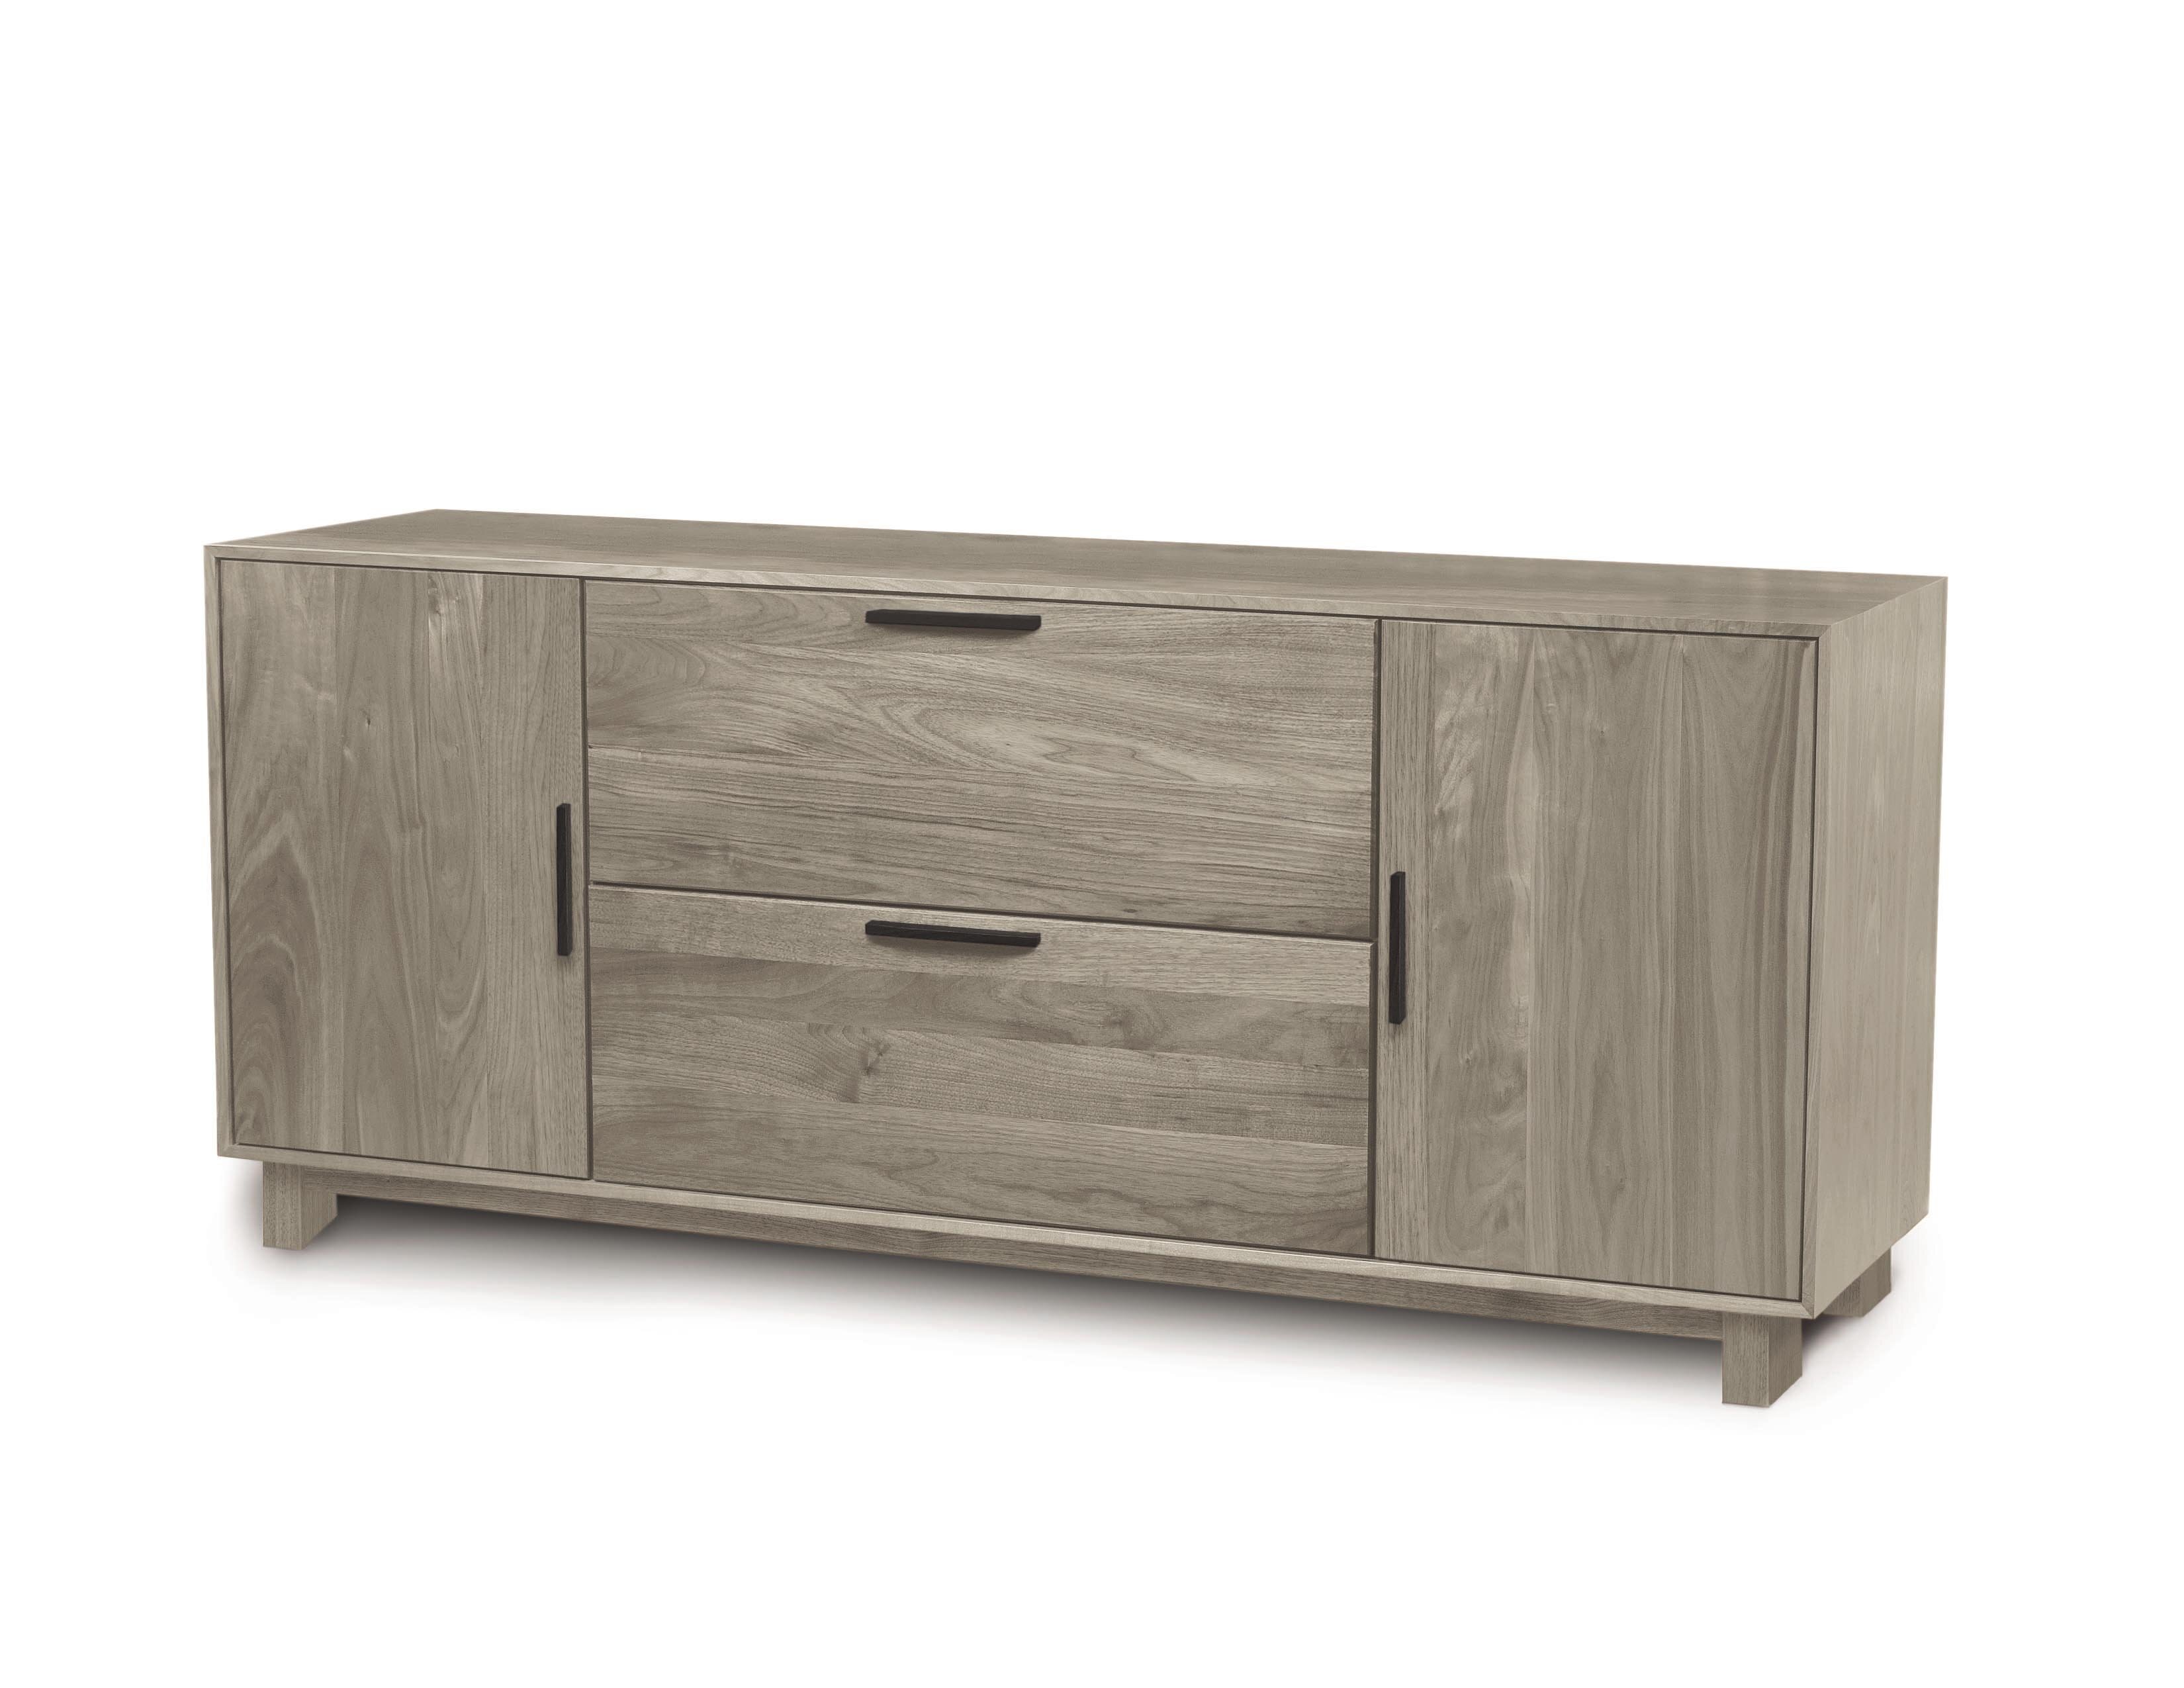 Copeland Furniture Linear Office Storage 2 Drawer Lateral Filing